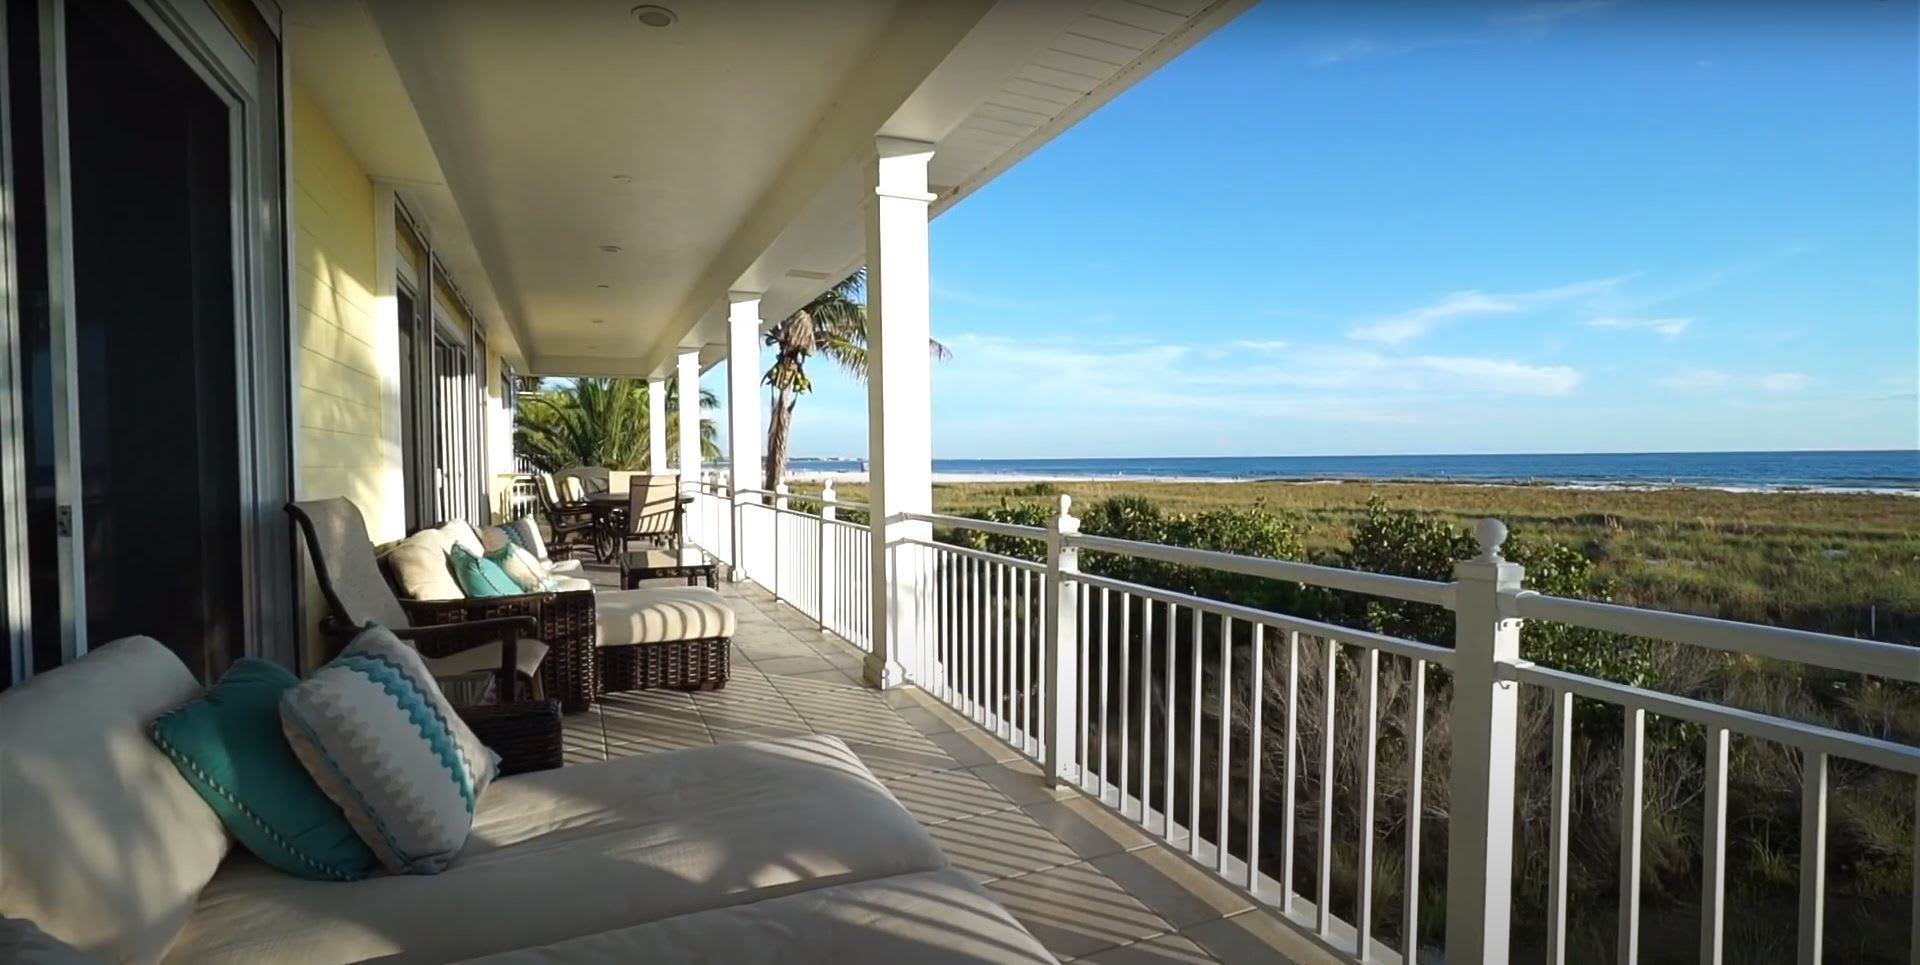 “The Belle Of The Beach” Siesta Key, Florida Home For Sale At 636 Beach Road